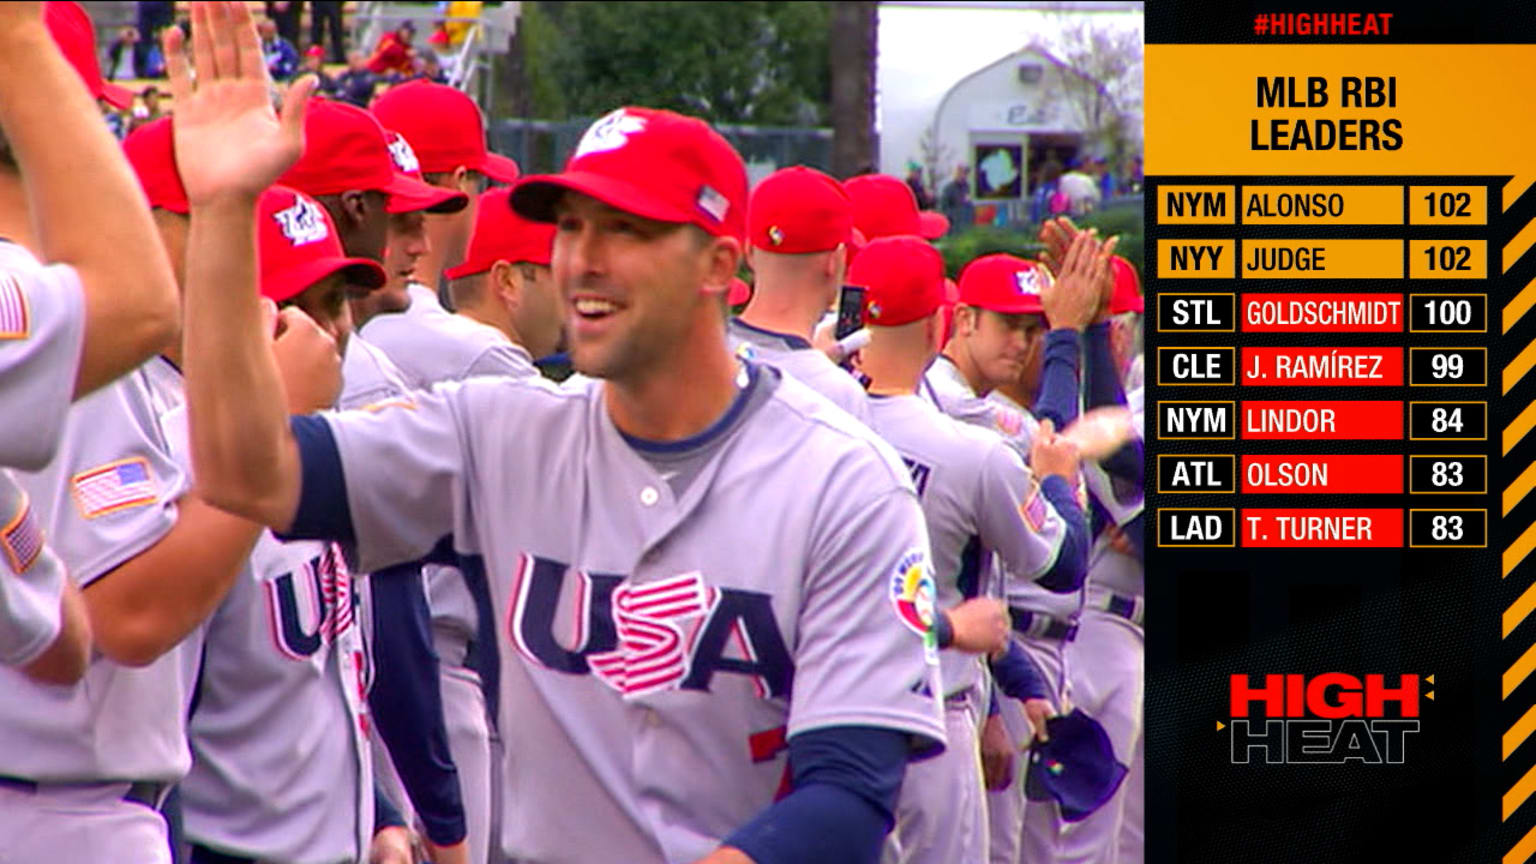 Penn's Mark DeRosa takes on a new challenge: Managing for the first time  with Team USA in the WBC